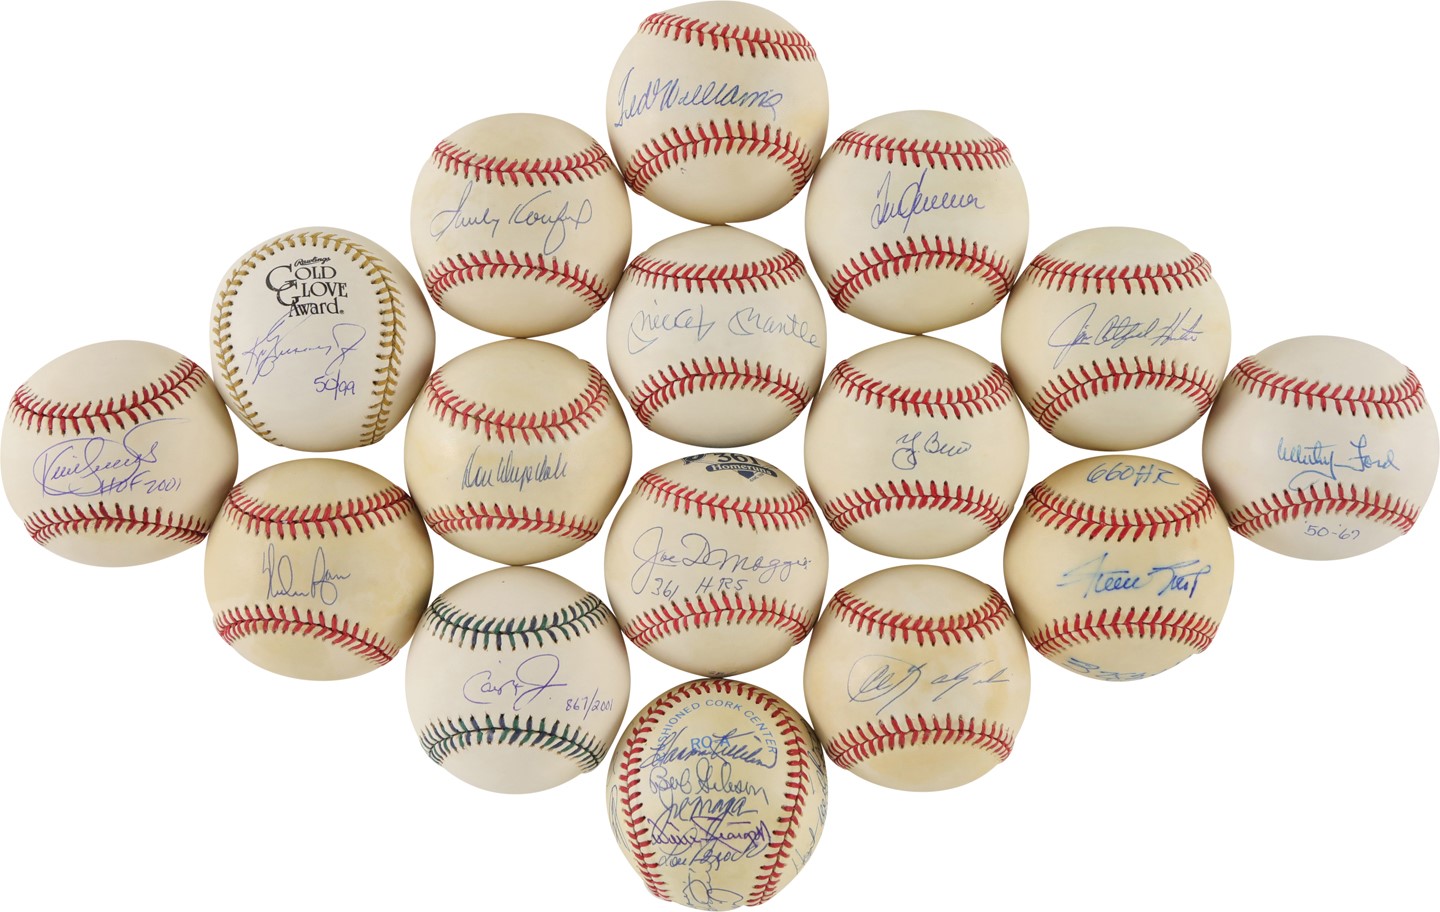 Baseball Autographs - Hall of Famers Signed Baseball Collection w/Mantle, Williams, & DiMaggio (39)